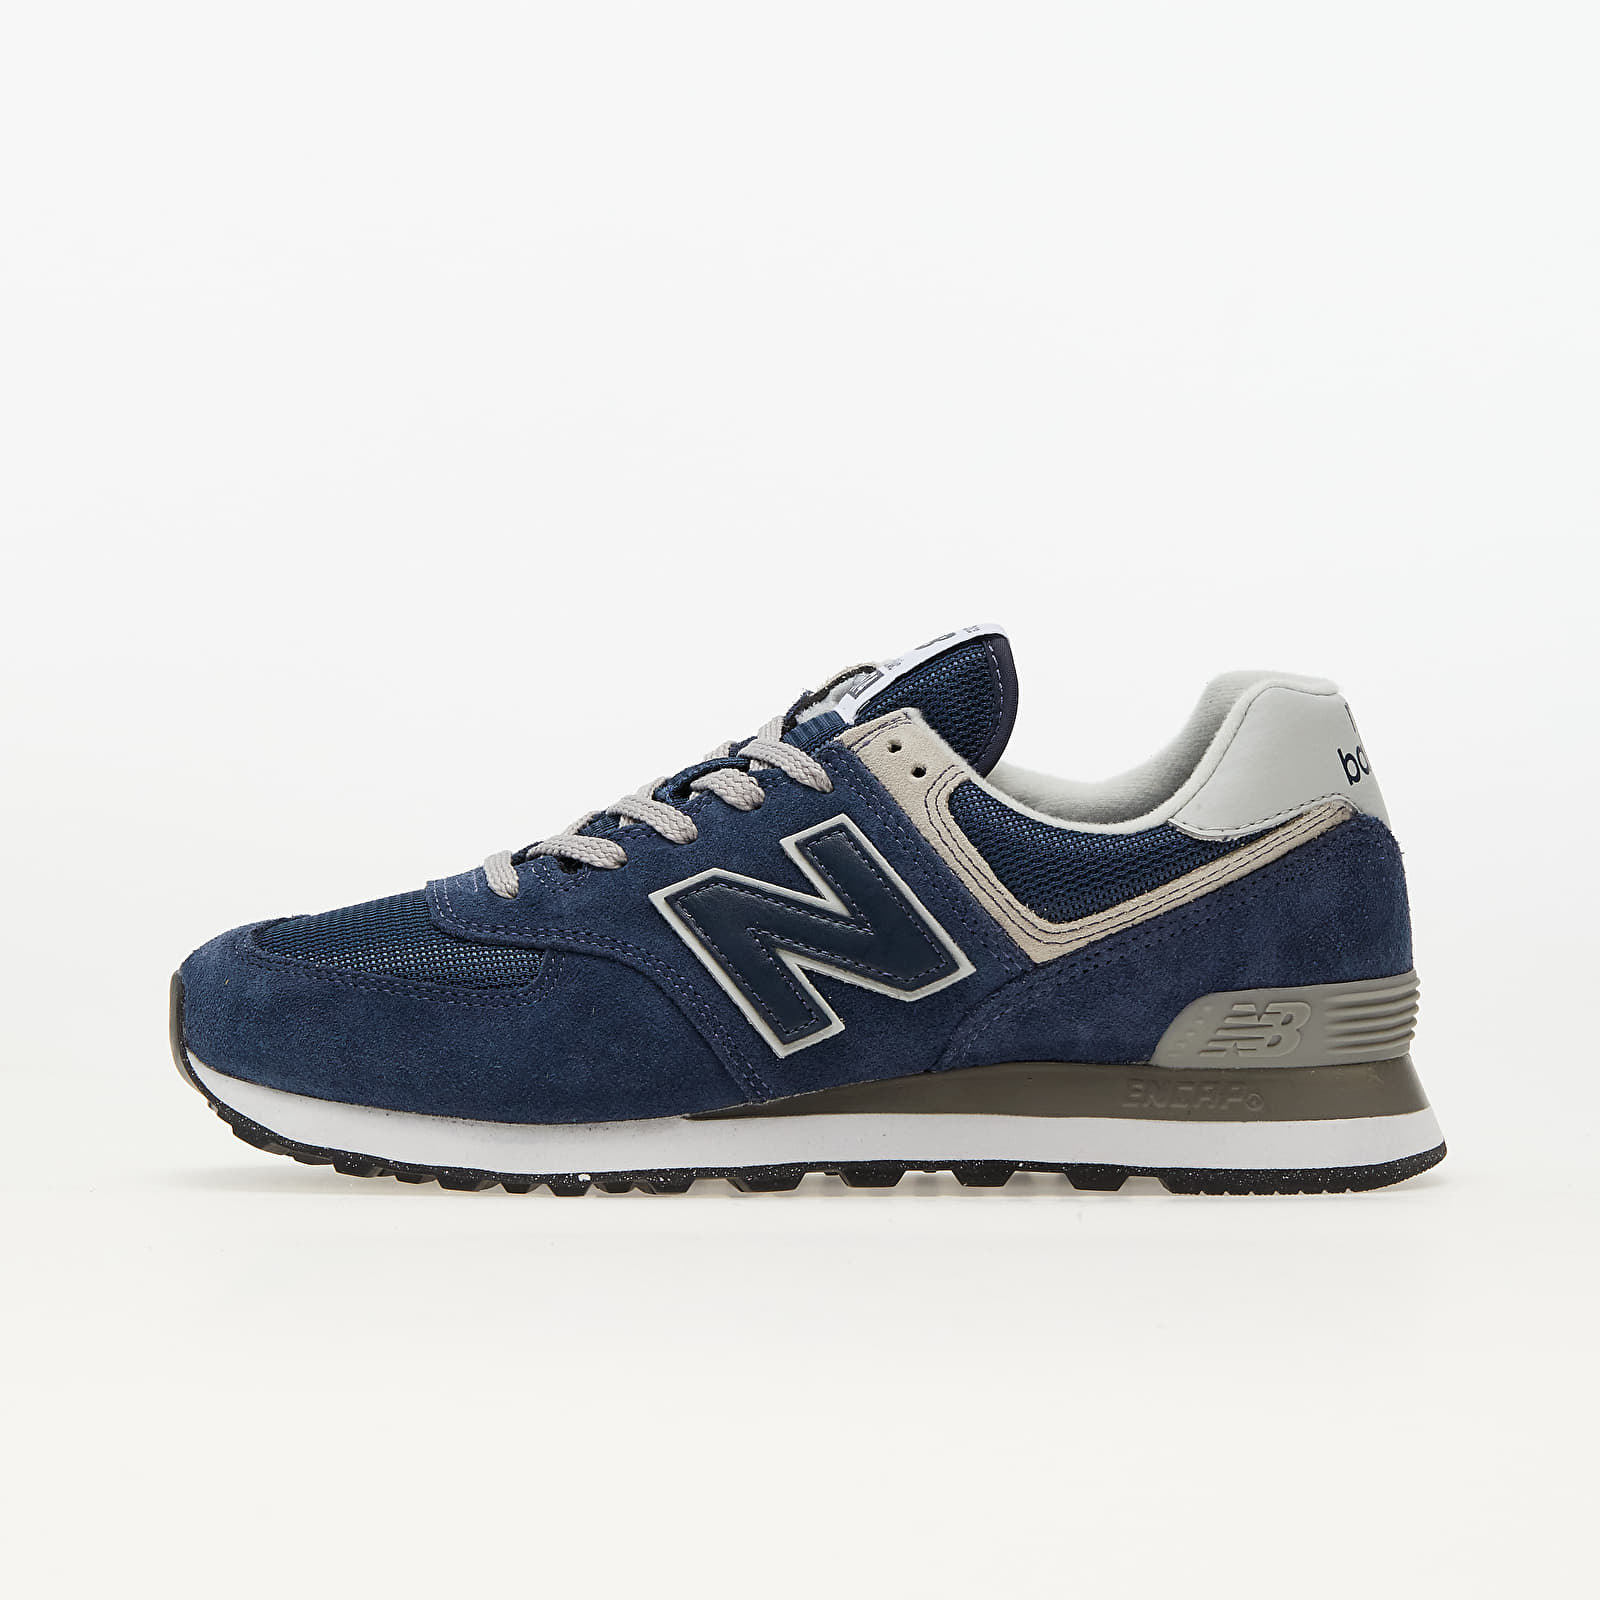 Chaussures et baskets homme New Balance 574 Navy